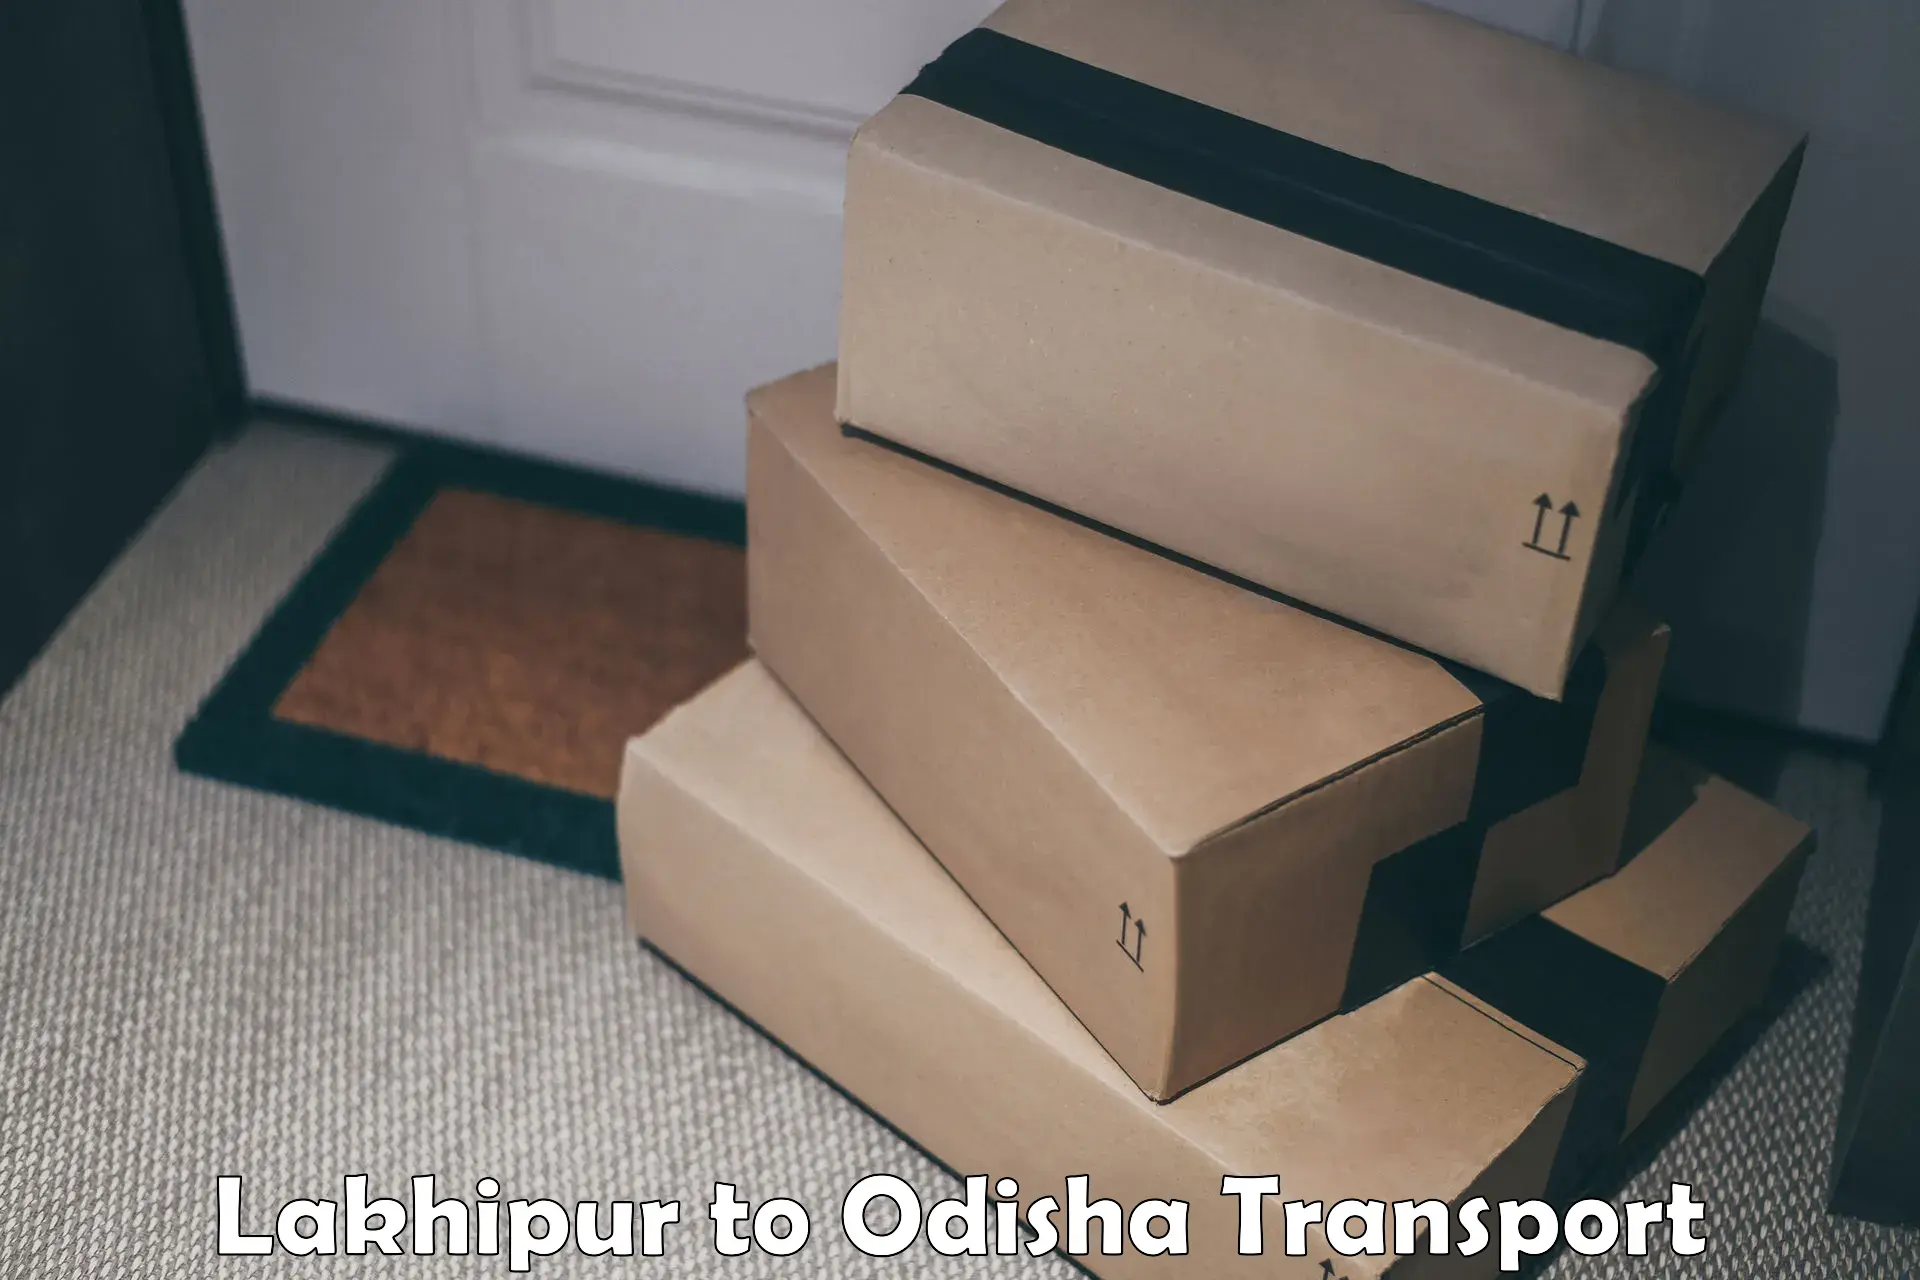 Express transport services in Lakhipur to Phulbani